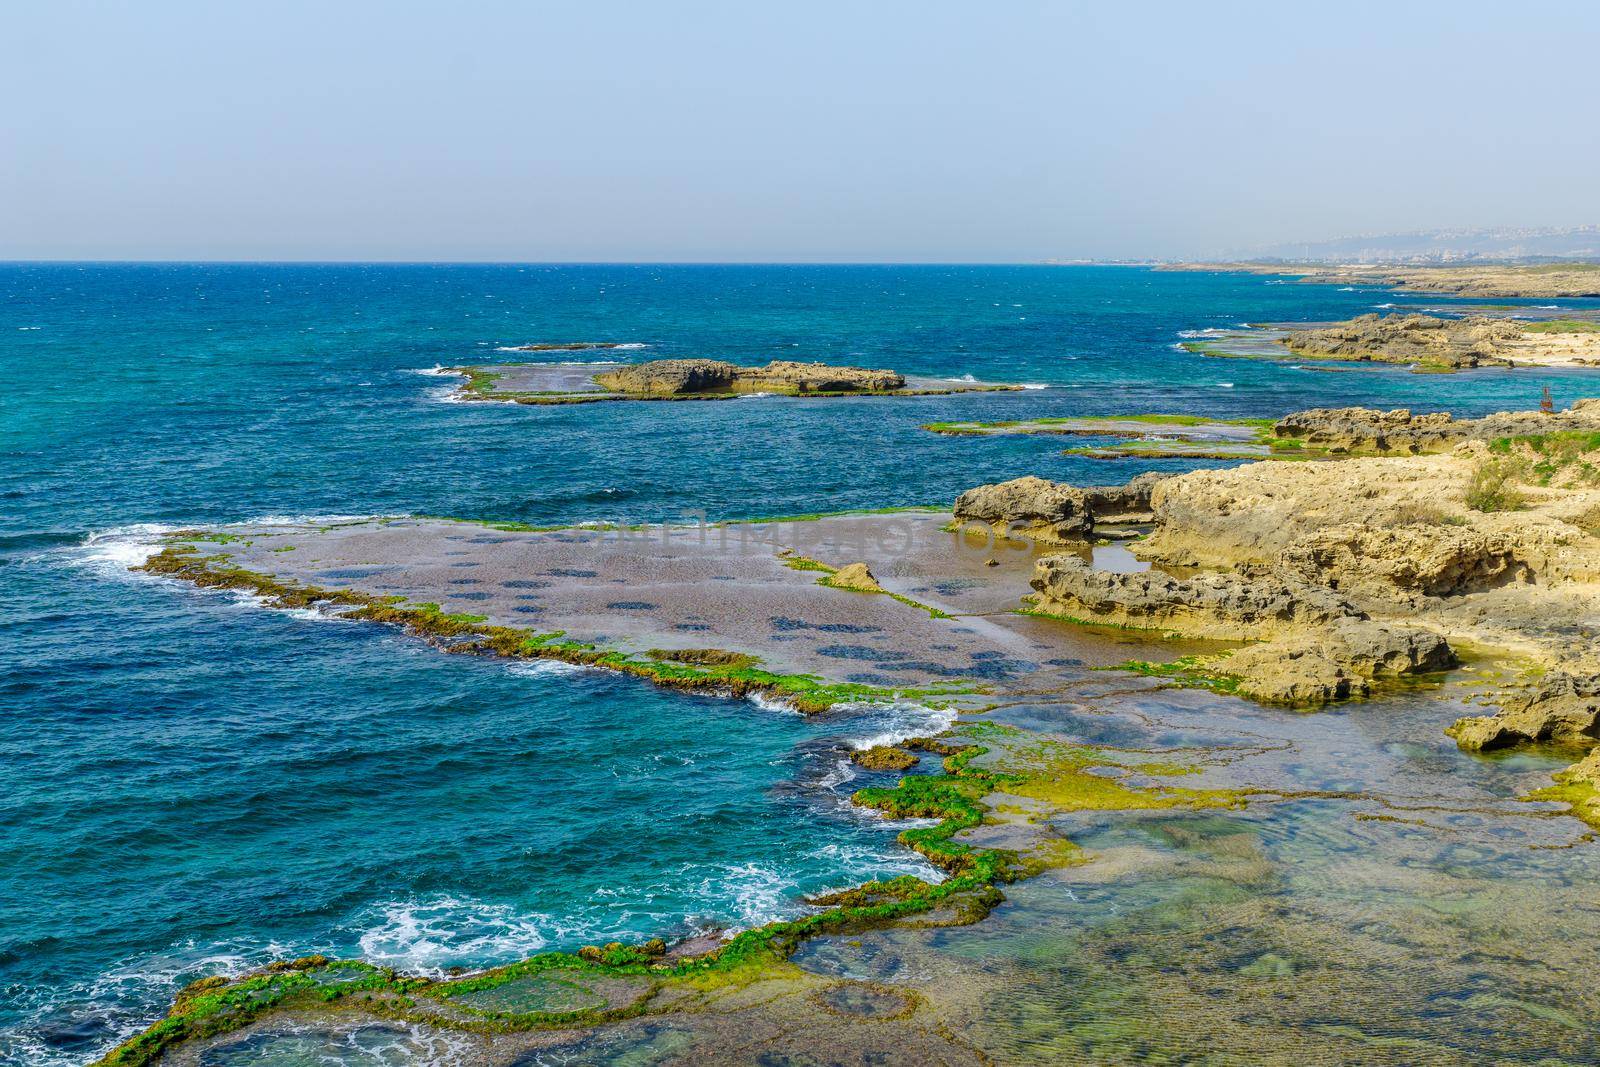 View of the beach, coves and sandstone cliffs in Dor beach, Northern Israel